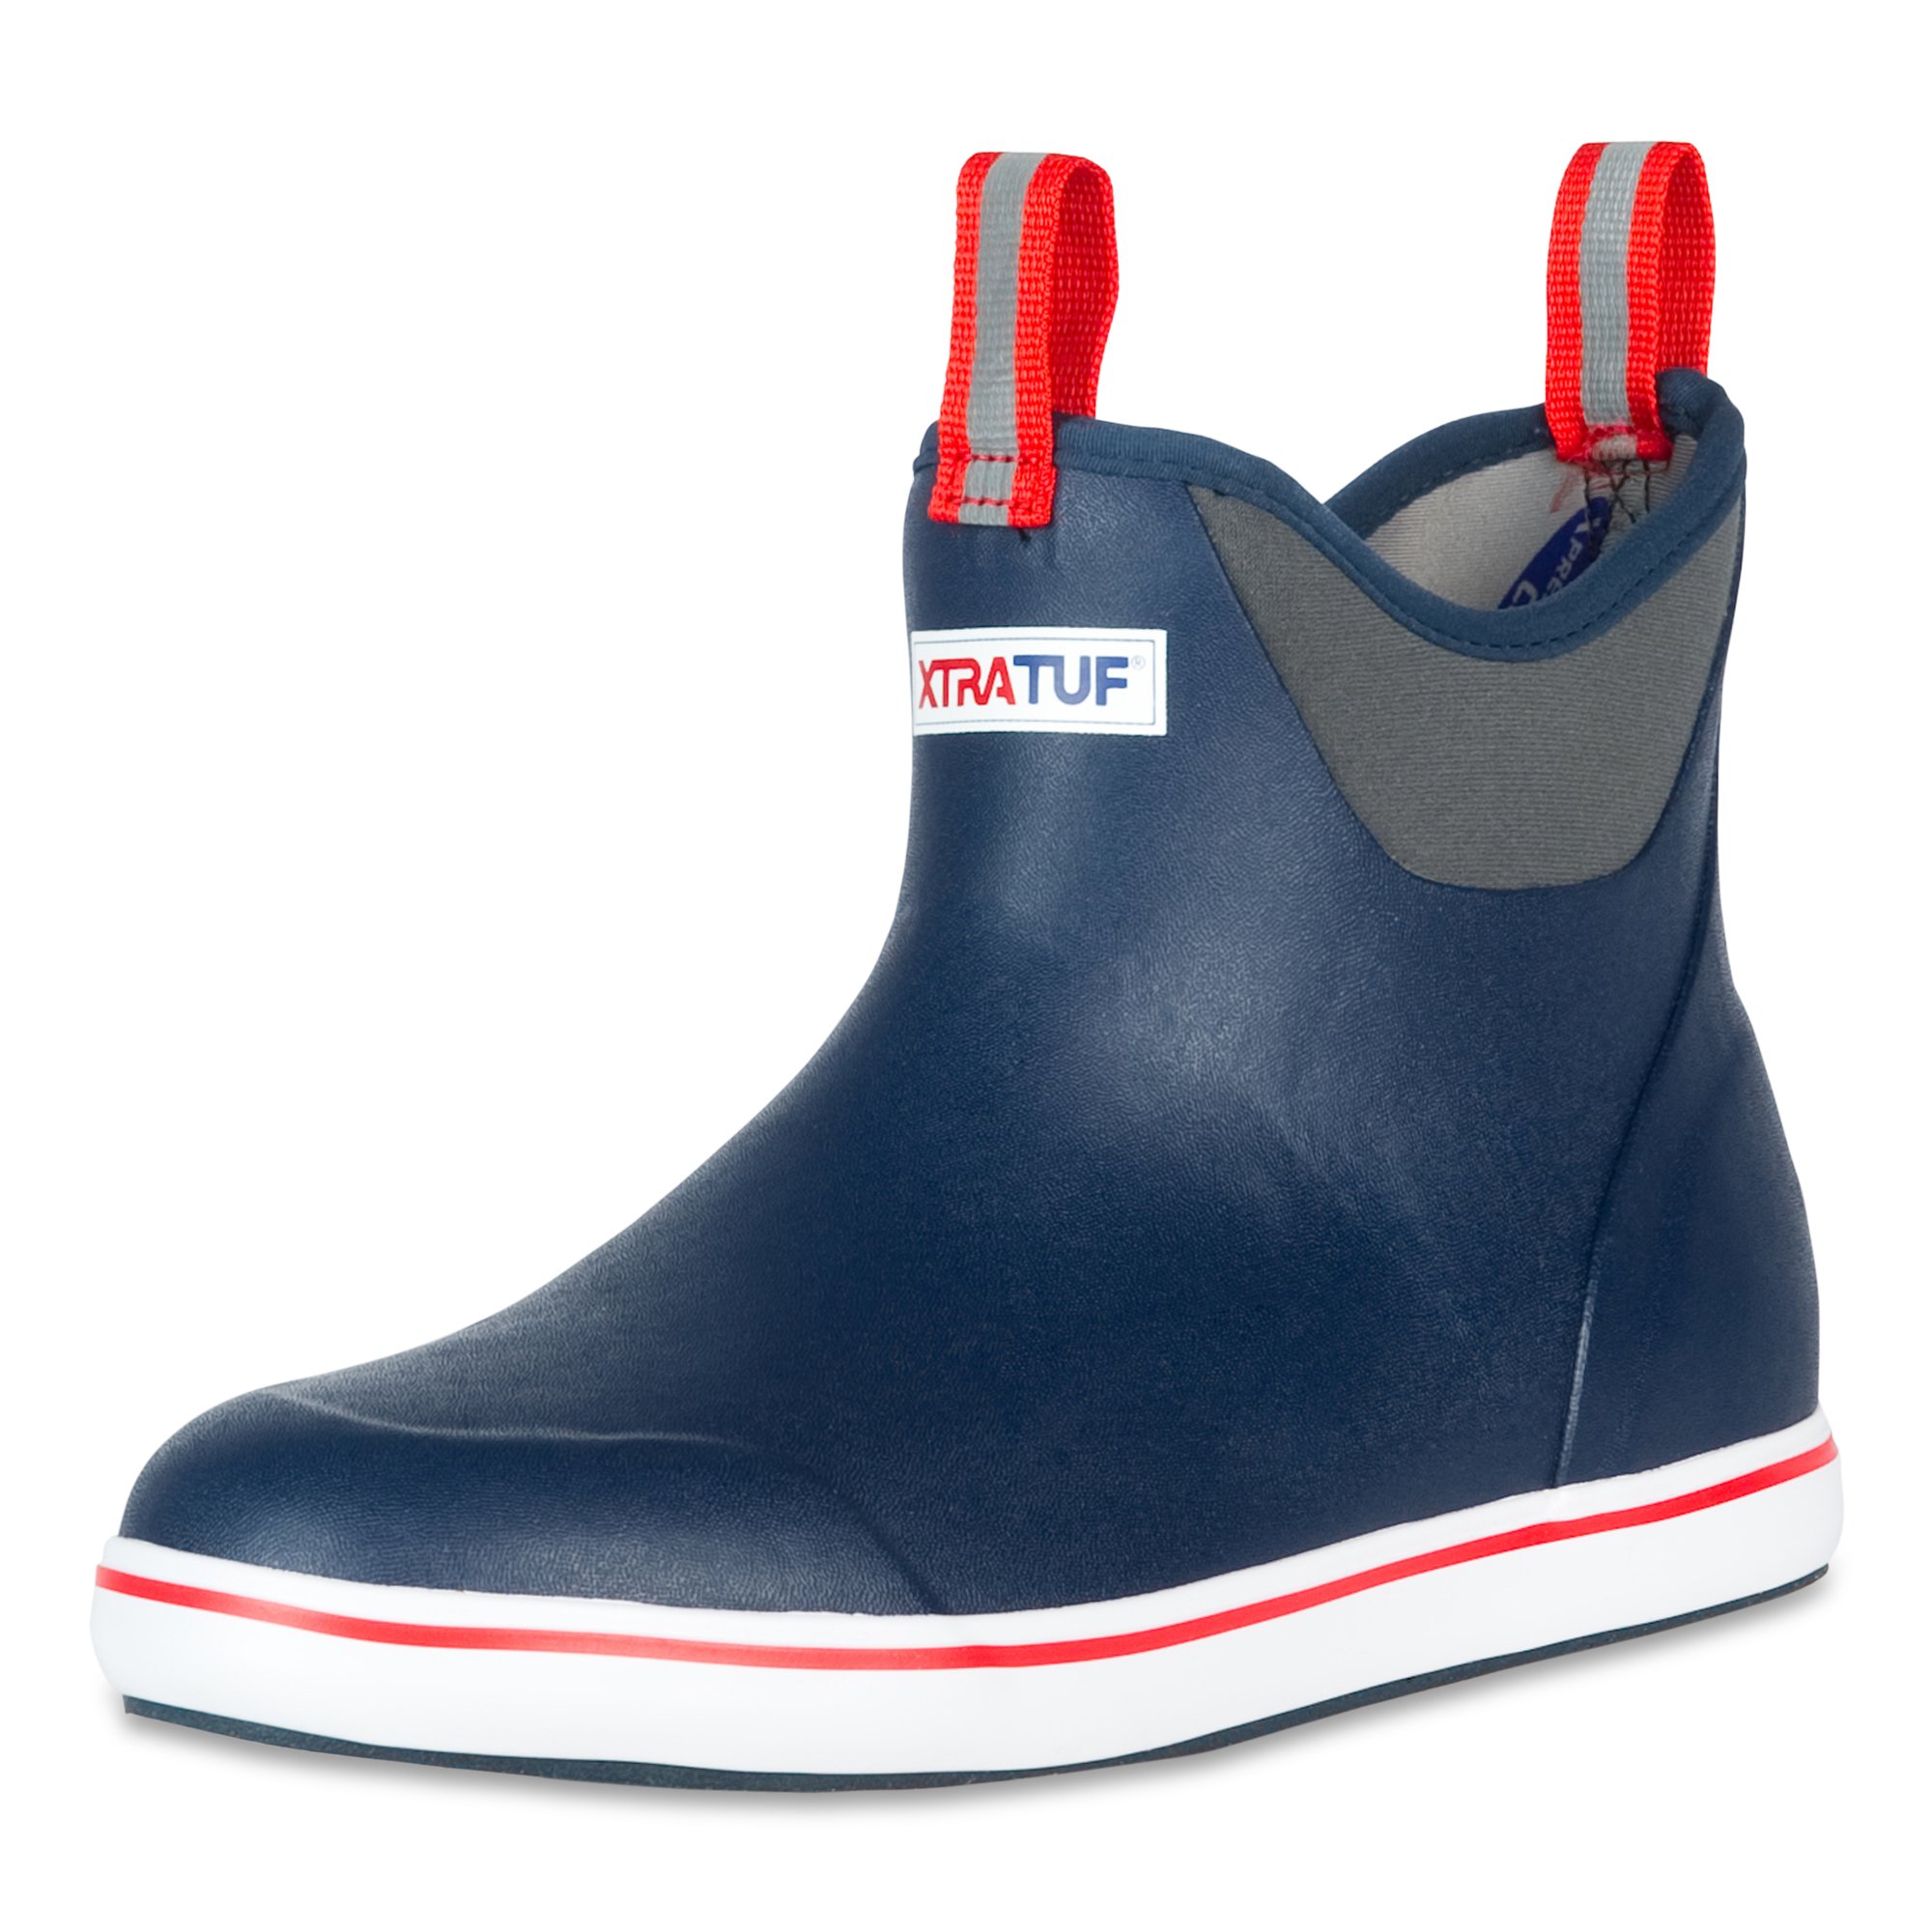 XTRATUF Performance Series 6 Inch Mens Full Rubber Ankle Deck Boots - Navy & Red  - Size 9